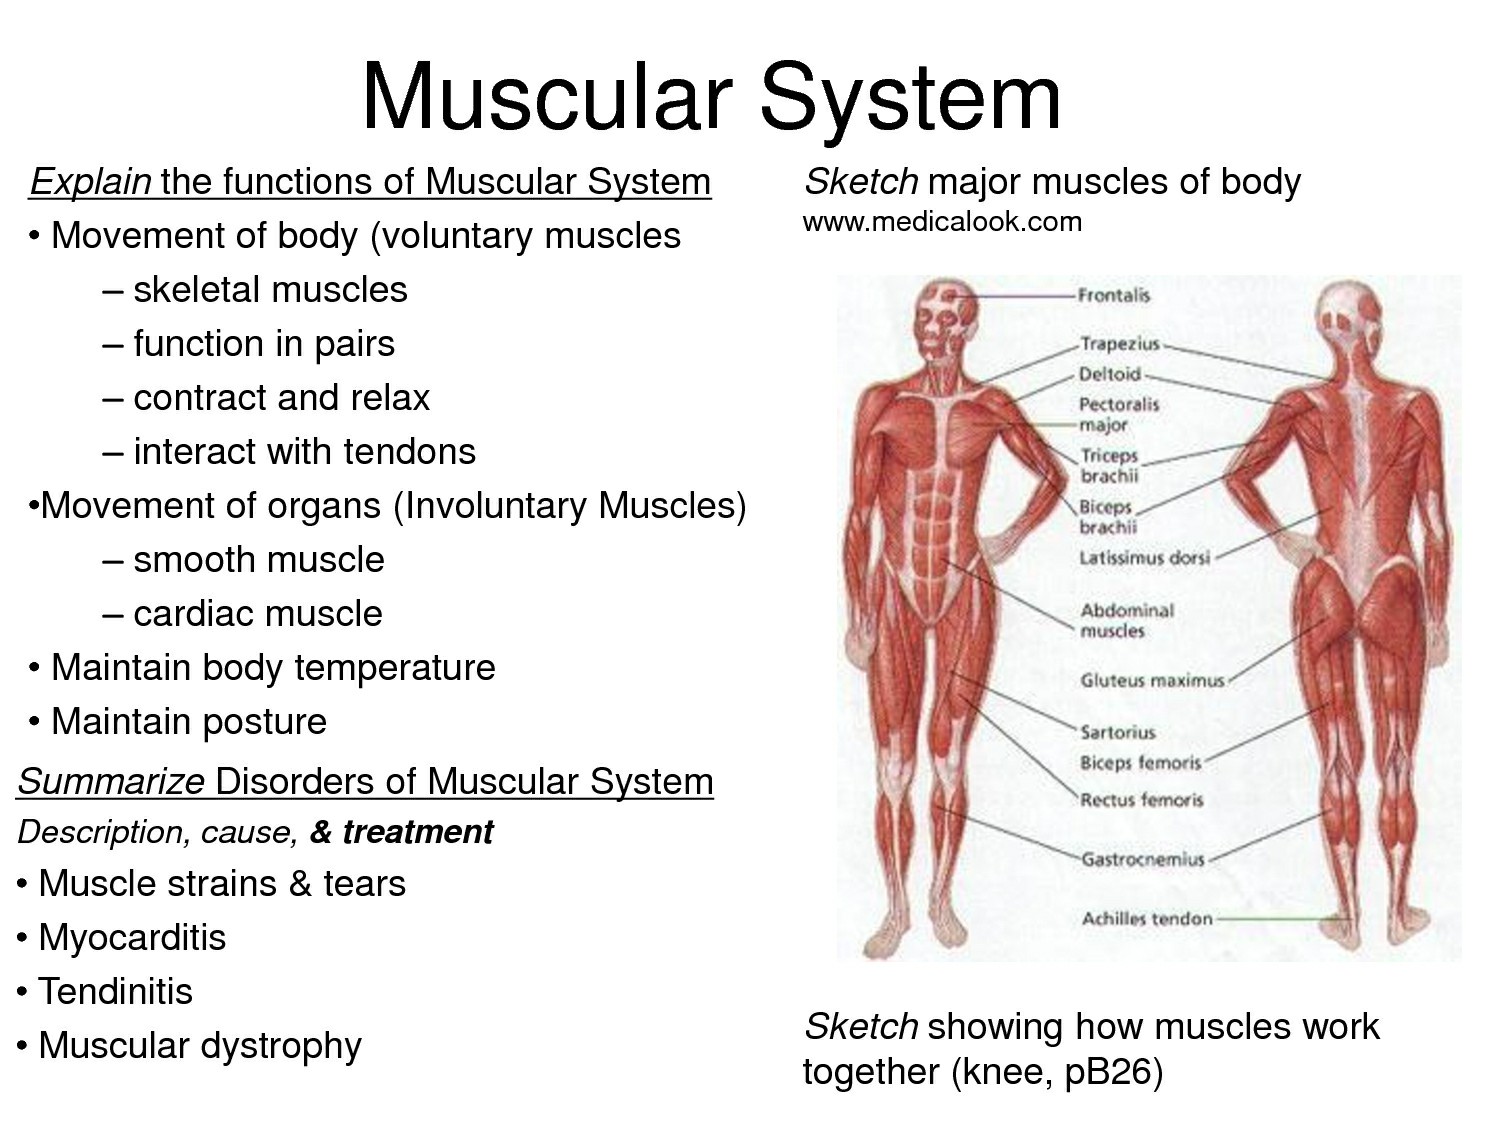 Muscular System Structure And Function Muscular System Facts | Anatomy | Pinterest | Muscular System And Pictures Wallpapers